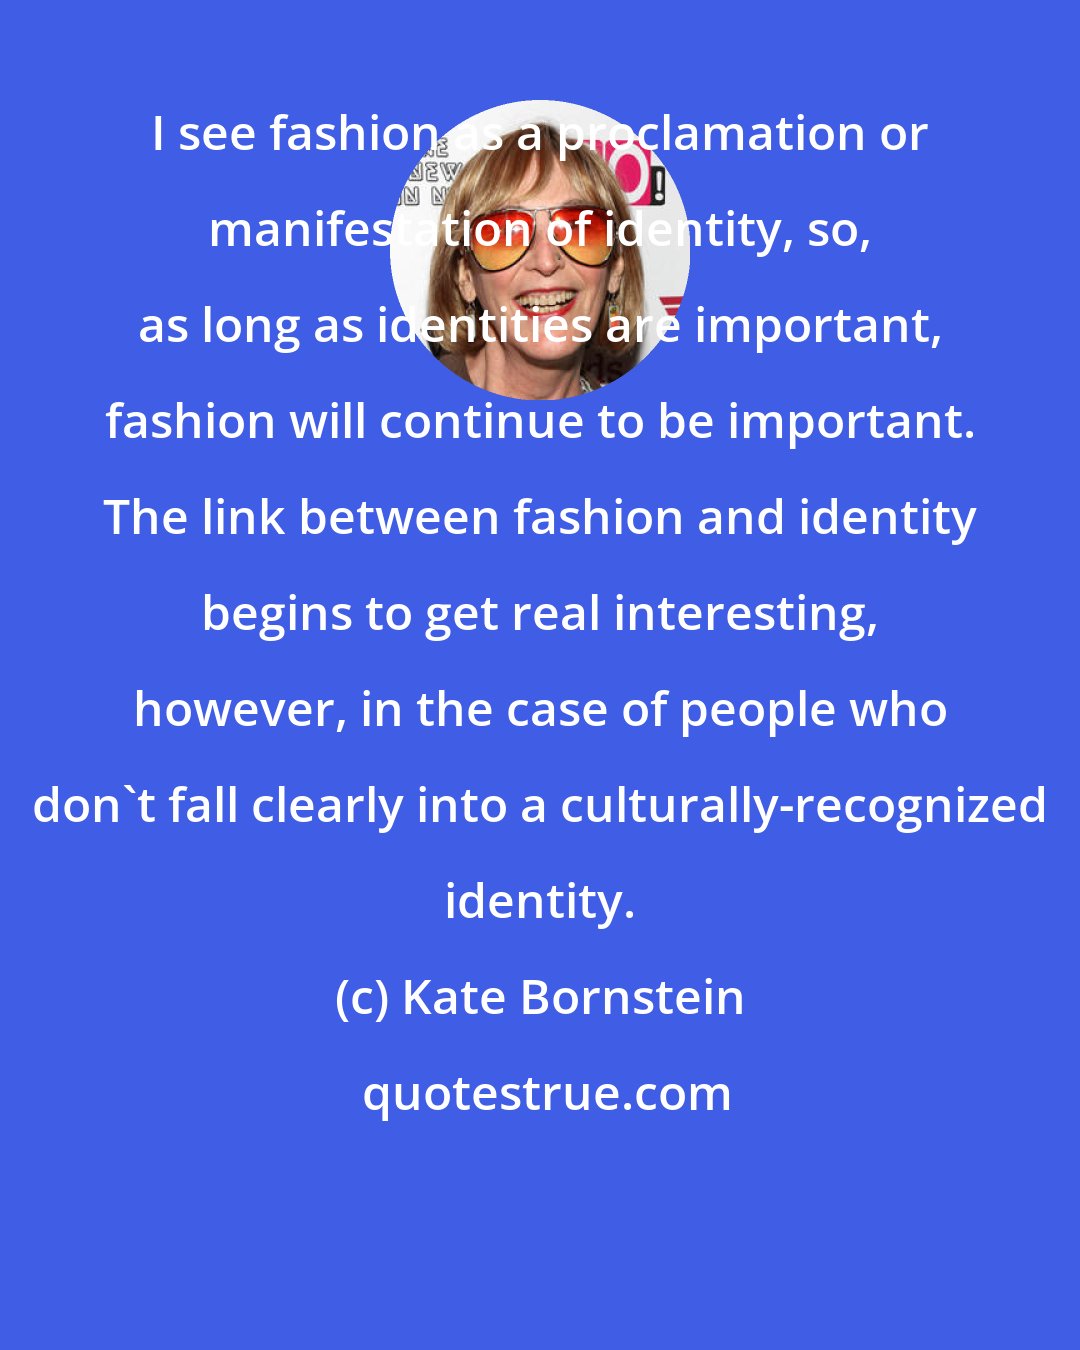 Kate Bornstein: I see fashion as a proclamation or manifestation of identity, so, as long as identities are important, fashion will continue to be important. The link between fashion and identity begins to get real interesting, however, in the case of people who don't fall clearly into a culturally-recognized identity.